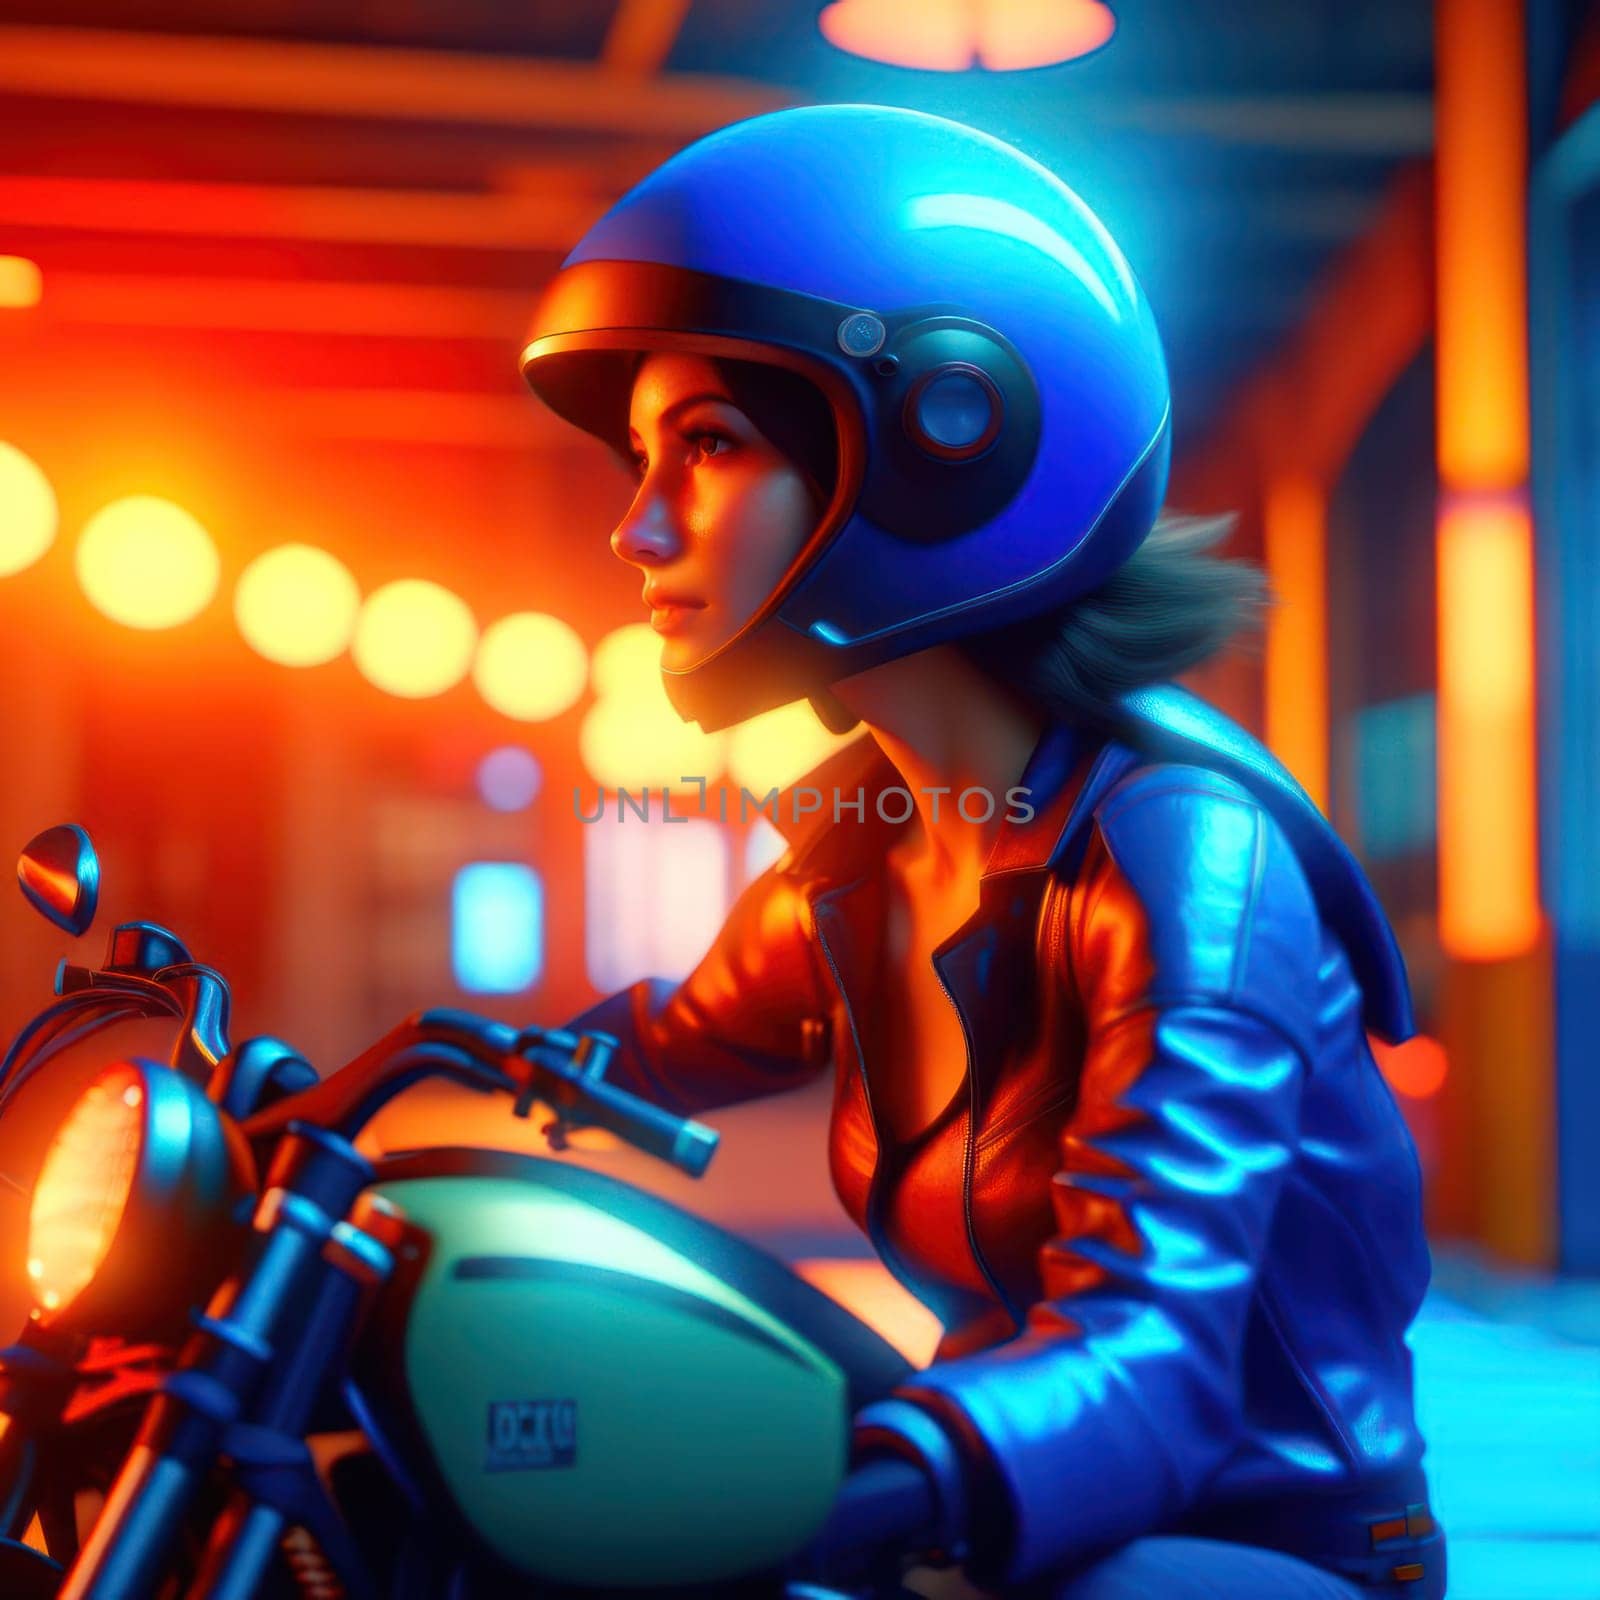 Girl on a motorcycle. Image created by AI